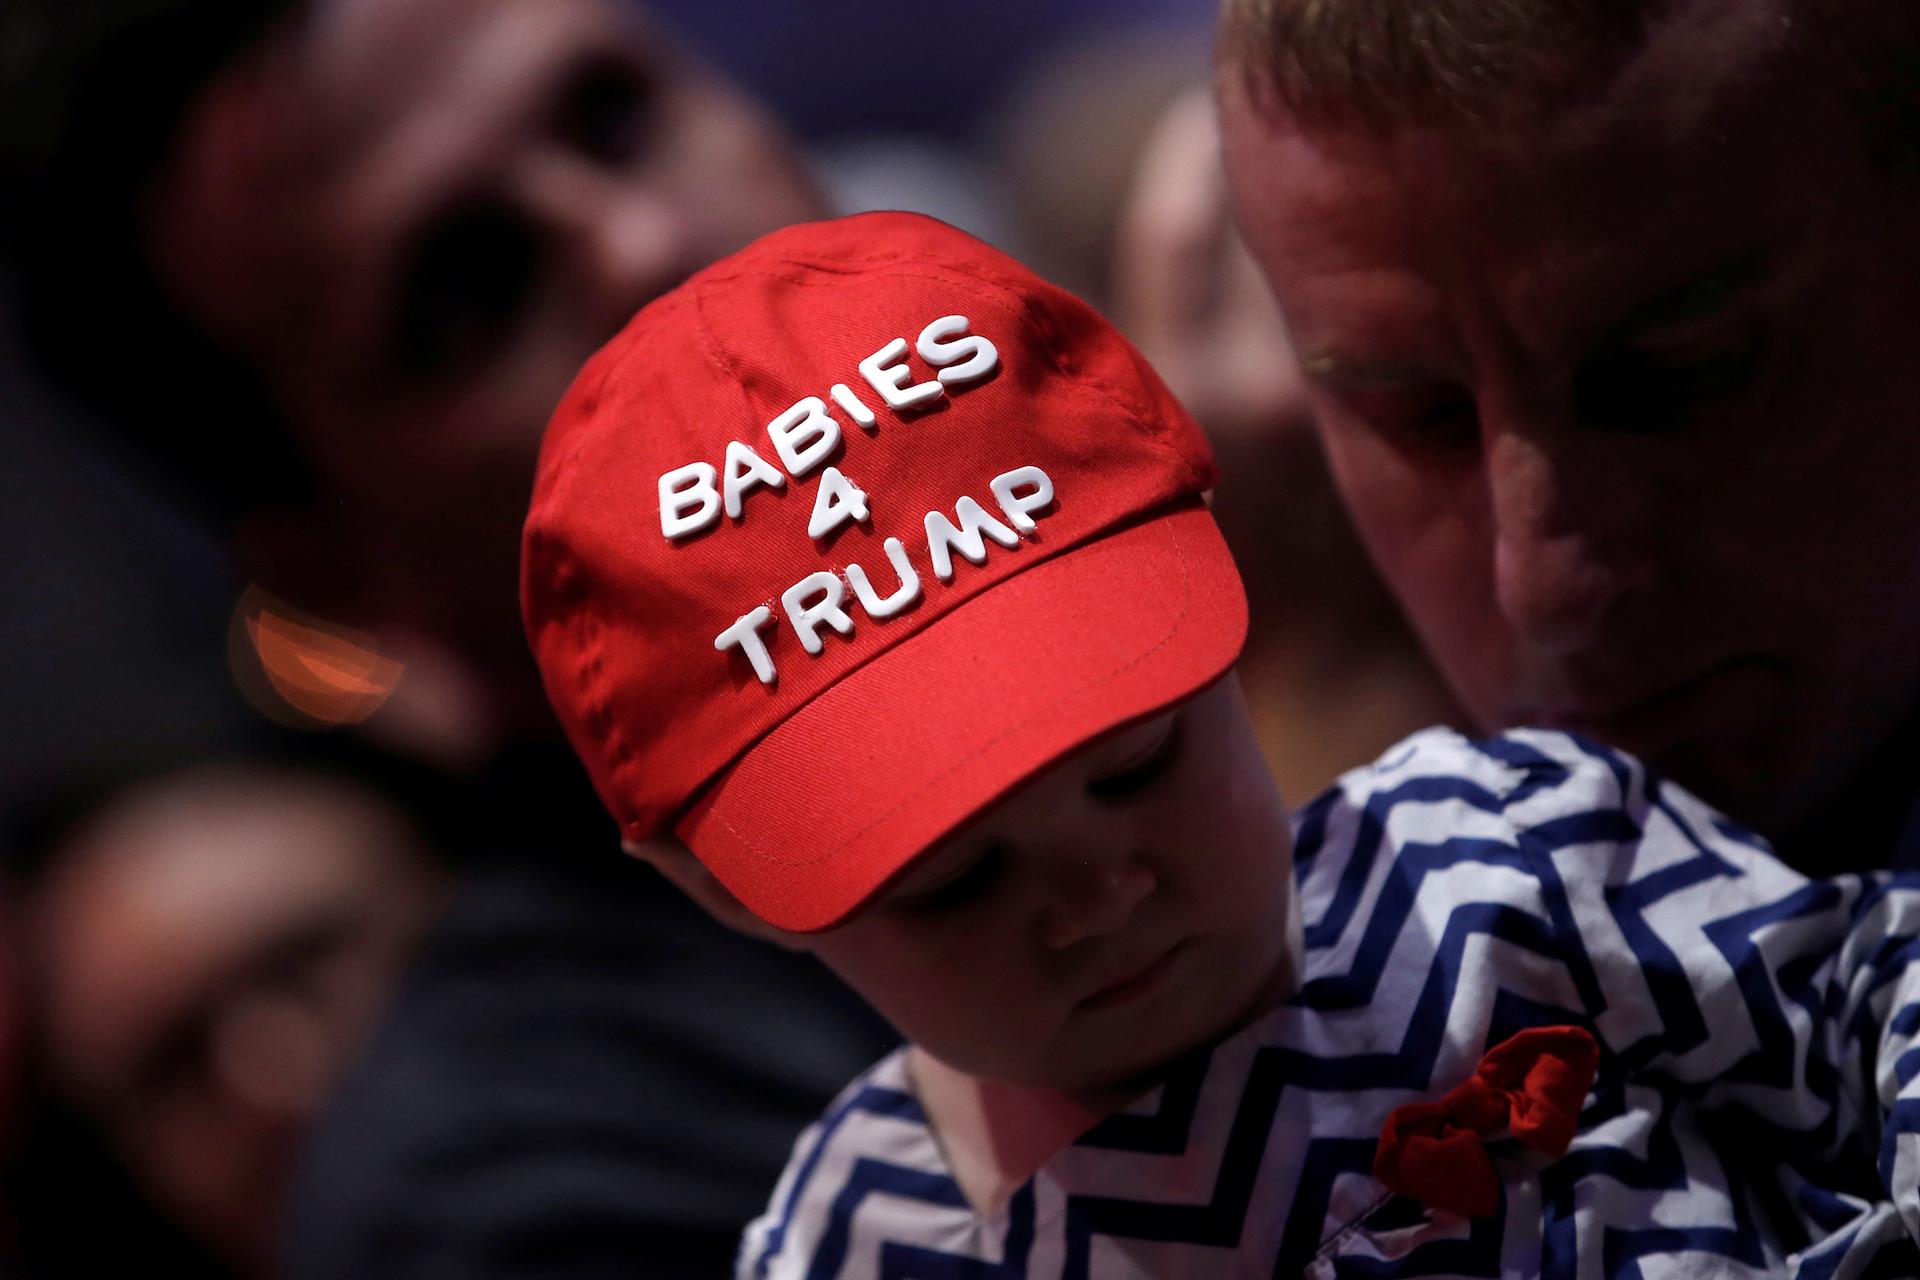 A small child wears a "Babies 4 Trump" cap as the then-candidate Donald Trump spoke at a rally in Greenville, North Carolina, on Sept. 6, 2016.